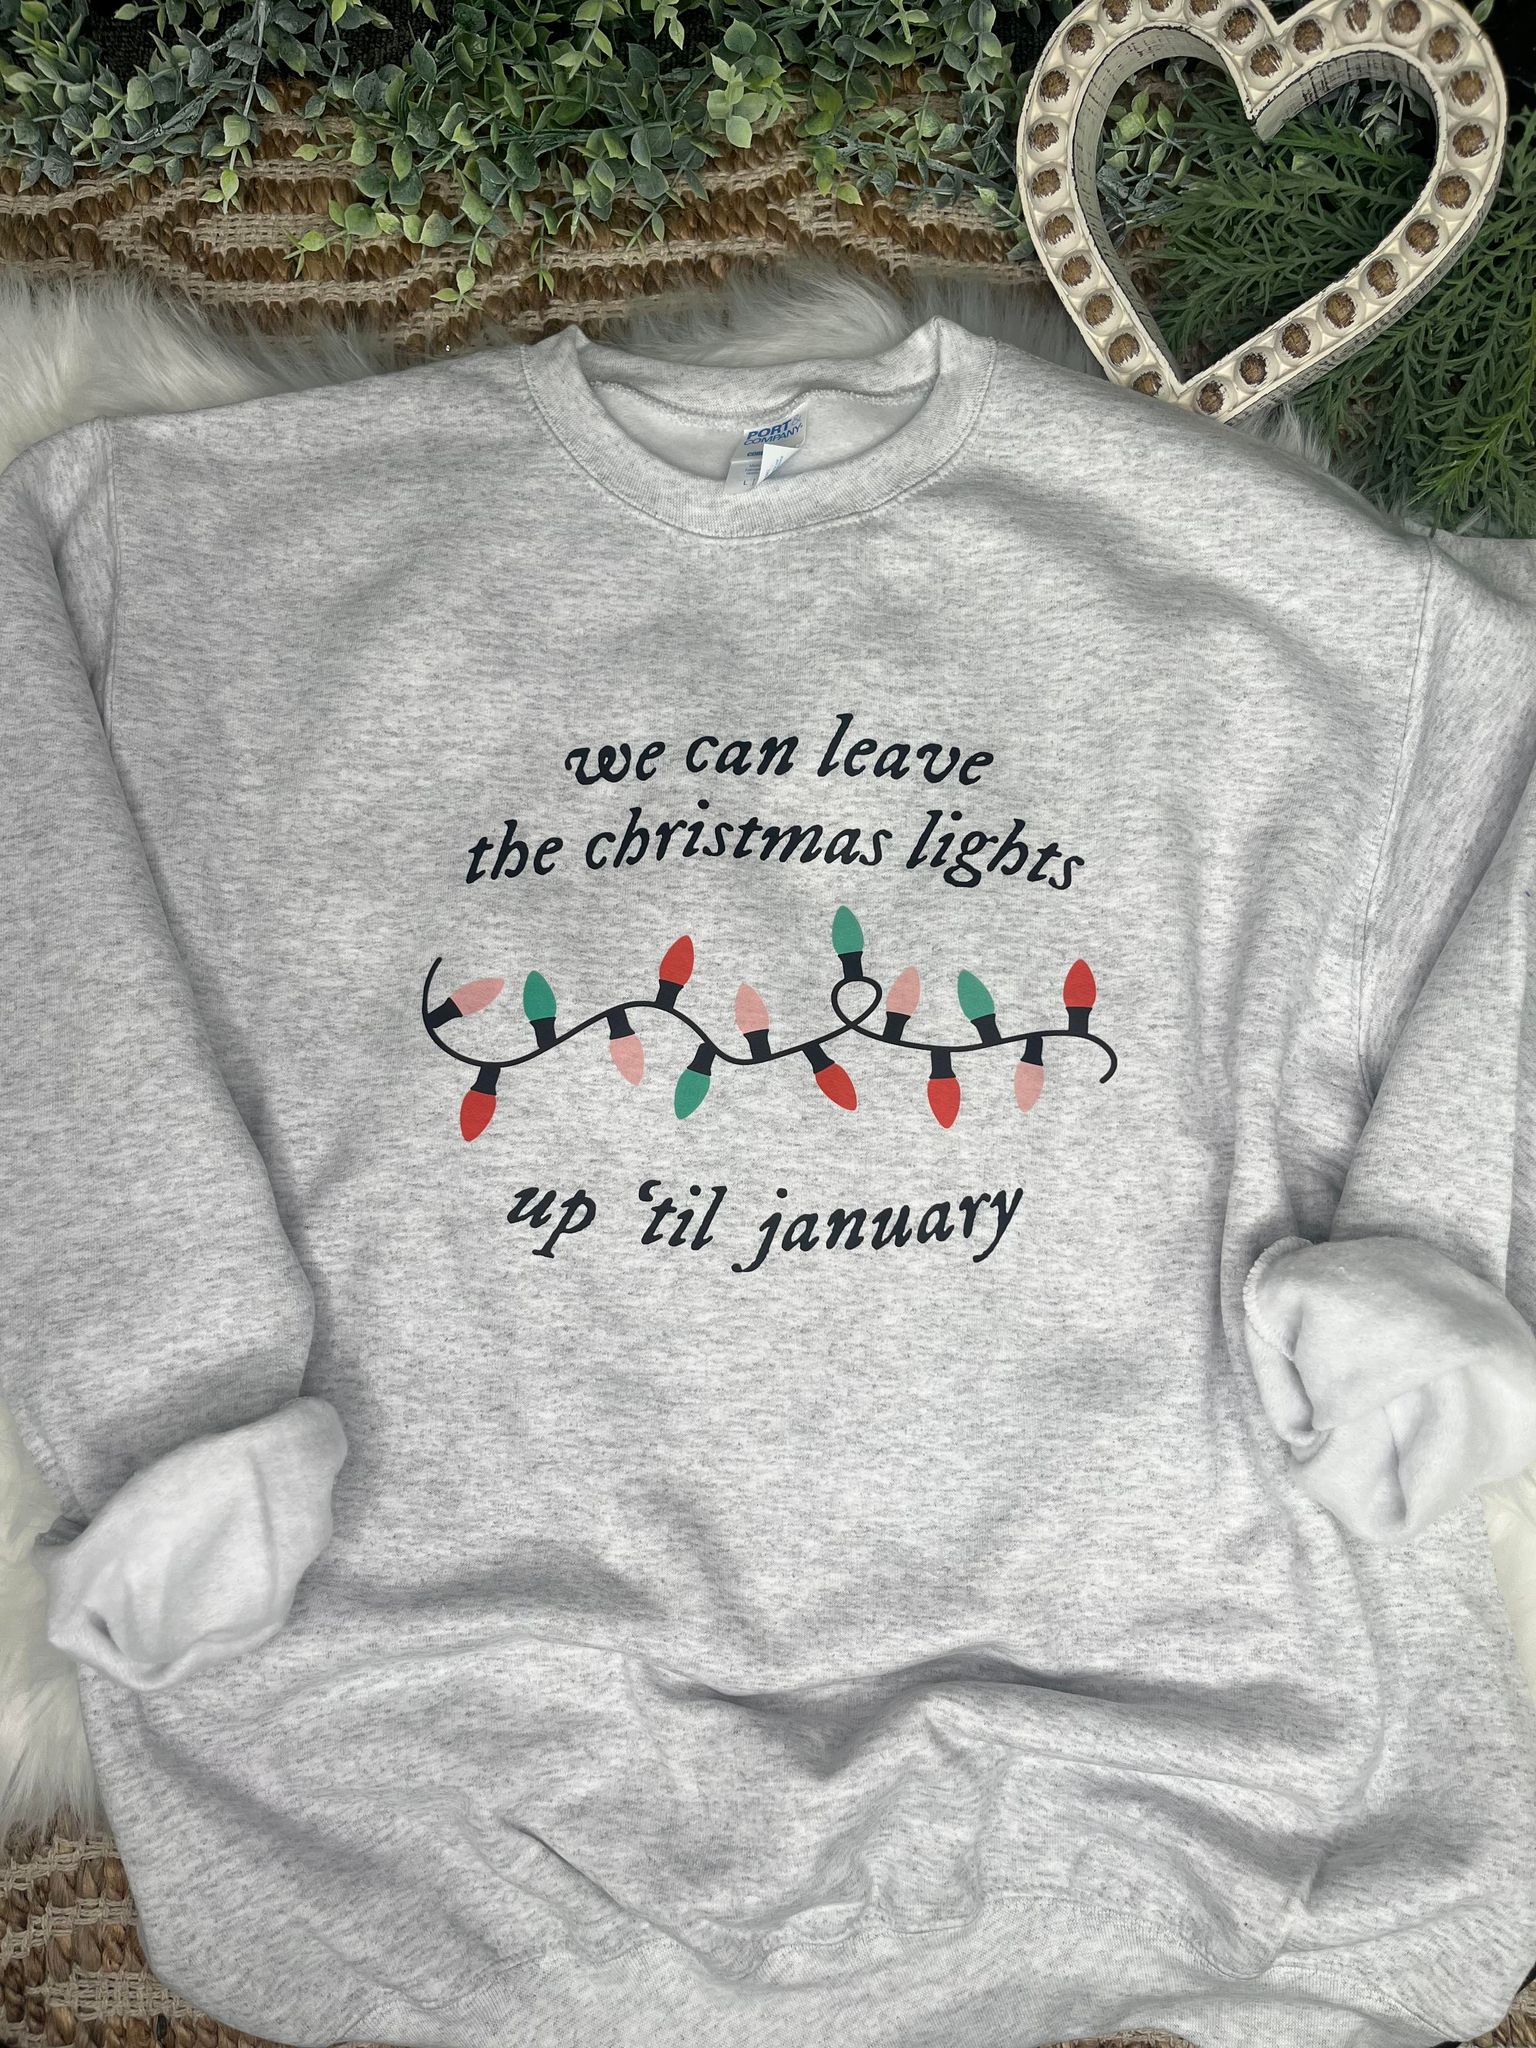 Up Leave Apparel – The Sweatshirt Can We Christmas LLC Lights ASK